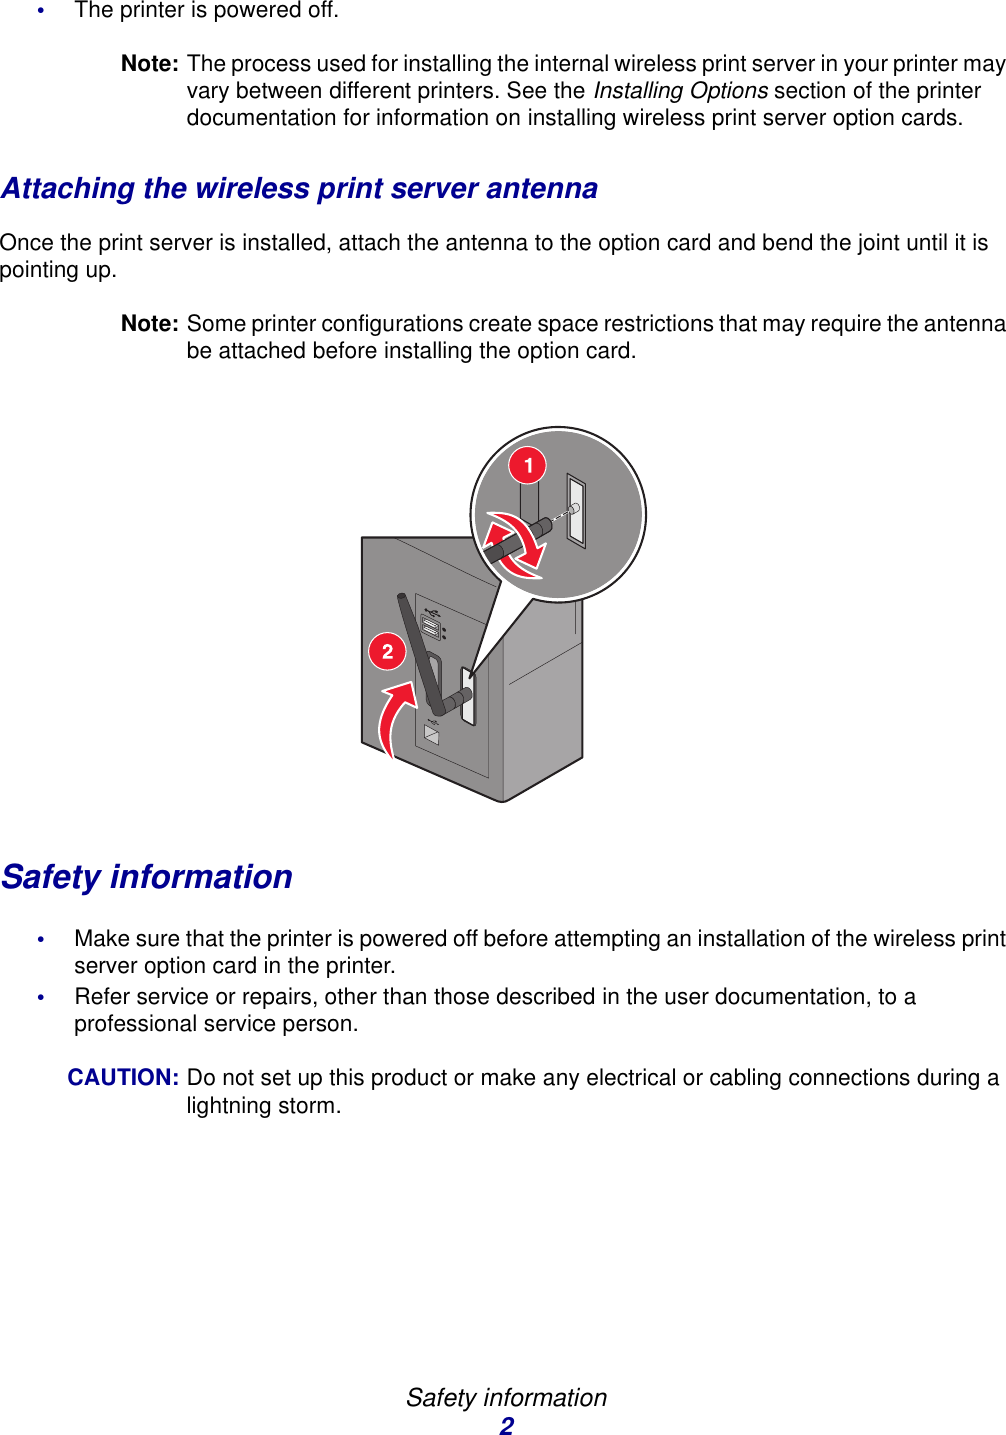 Safety information2•The printer is powered off.Note: The process used for installing the internal wireless print server in your printer may vary between different printers. See the Installing Options section of the printer documentation for information on installing wireless print server option cards. Attaching the wireless print server antennaOnce the print server is installed, attach the antenna to the option card and bend the joint until it is pointing up. Note: Some printer configurations create space restrictions that may require the antenna be attached before installing the option card. Safety information•Make sure that the printer is powered off before attempting an installation of the wireless print server option card in the printer. •Refer service or repairs, other than those described in the user documentation, to a professional service person. CAUTION: Do not set up this product or make any electrical or cabling connections during a lightning storm. 